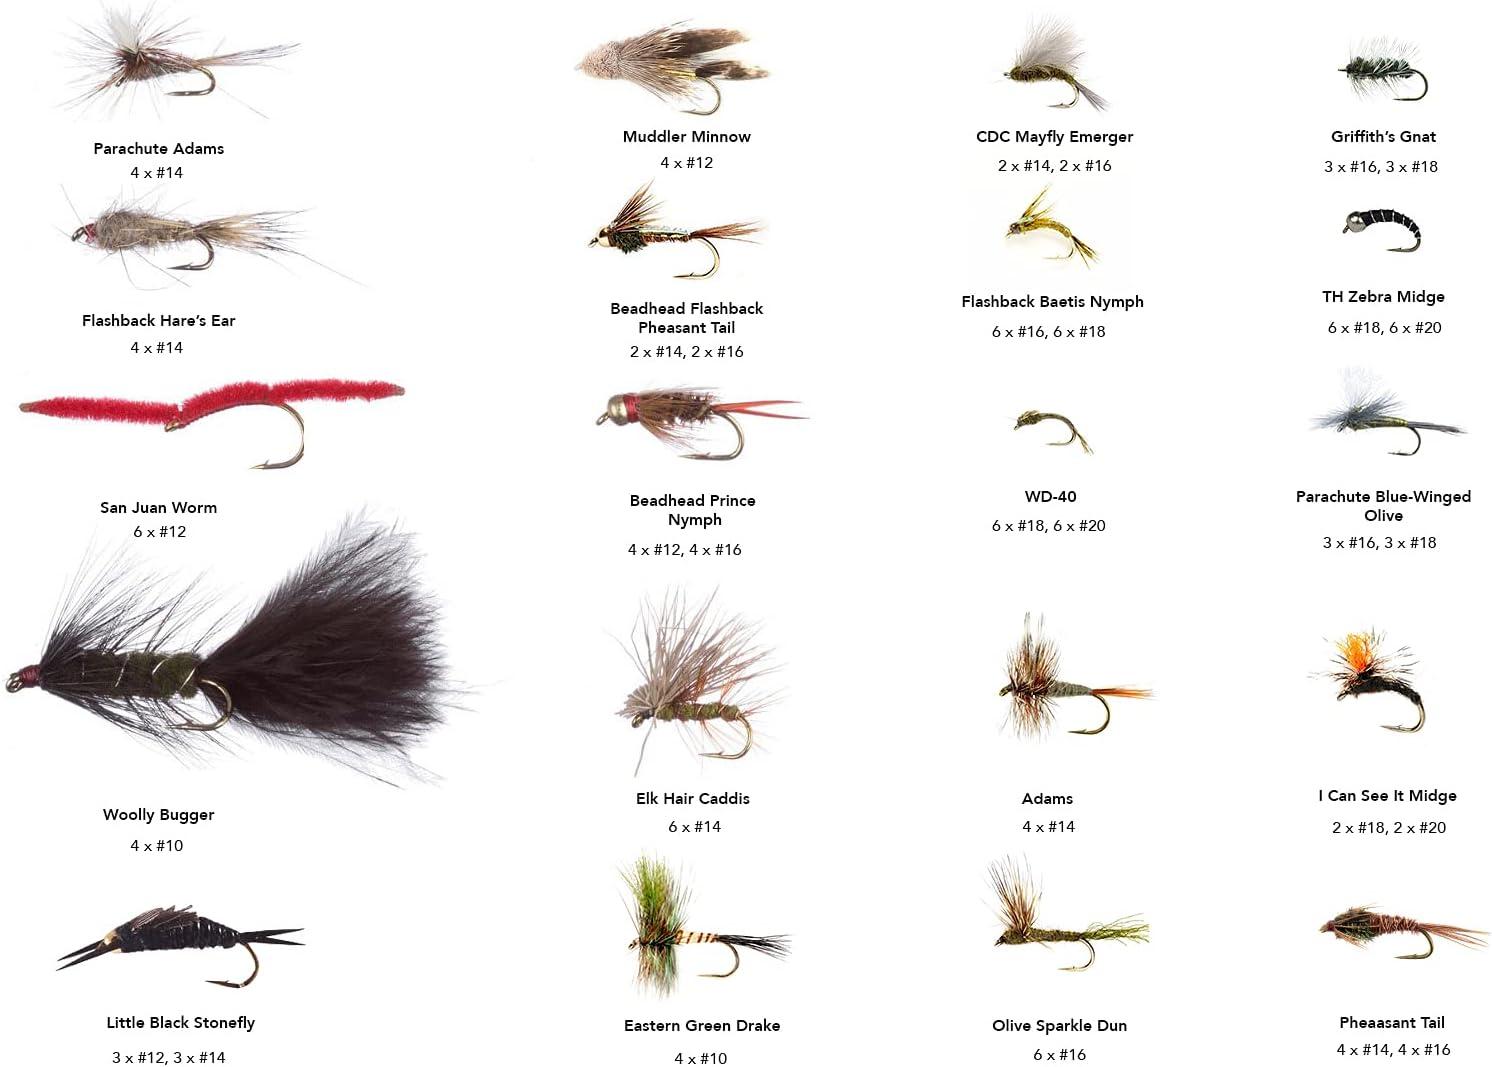 Fishing On The Fly, 32/64/124 Premium Hand-Tied Dry Flies, Nymphs,  Streamers, Terrestrials, Essential Trout Flies Starter Kit Essential Fly  Assortment, Waterproof Fly Box, 124 Flies